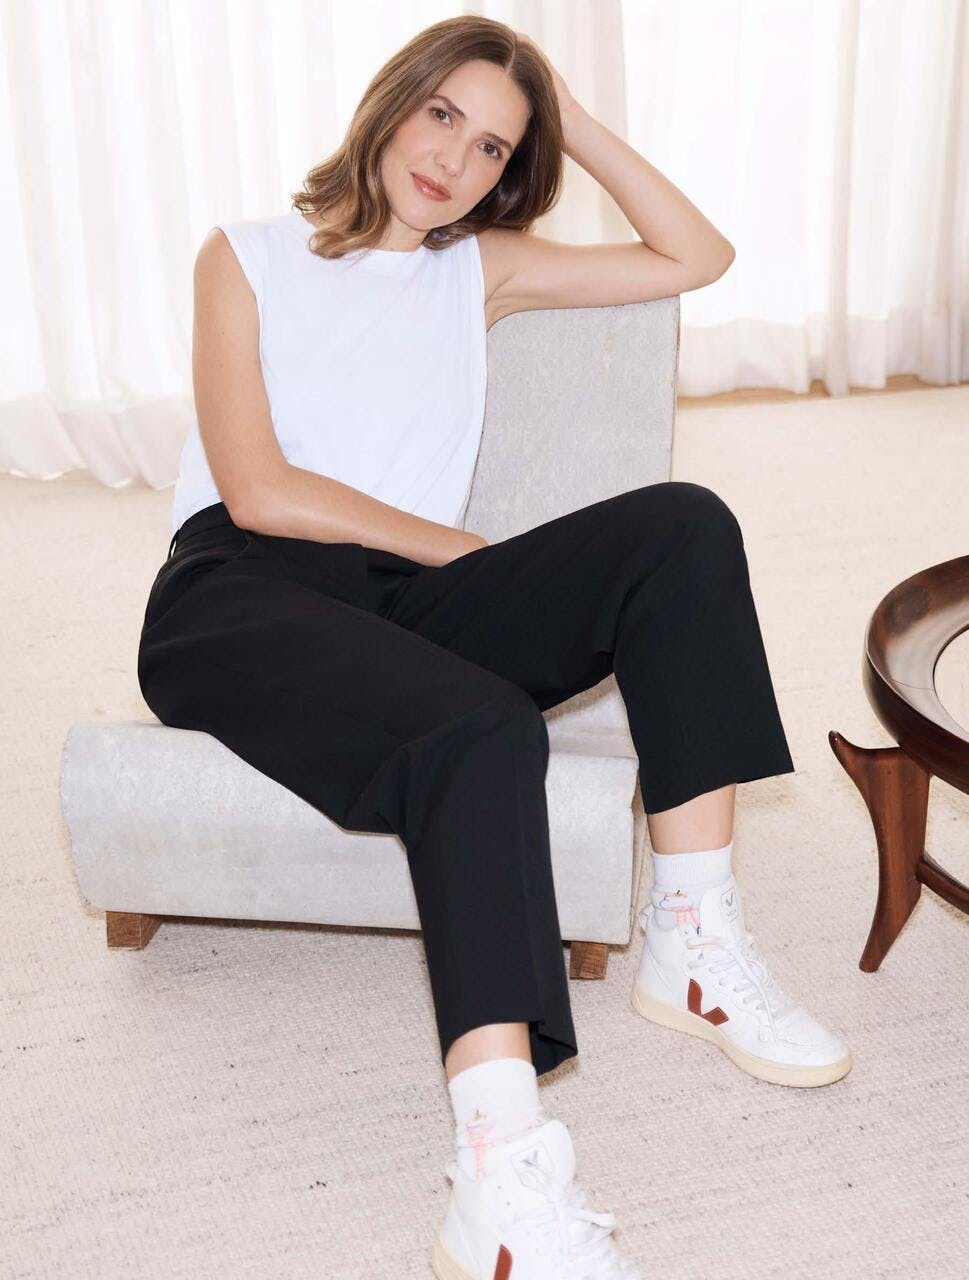 person sitting female girl teen clothing pants